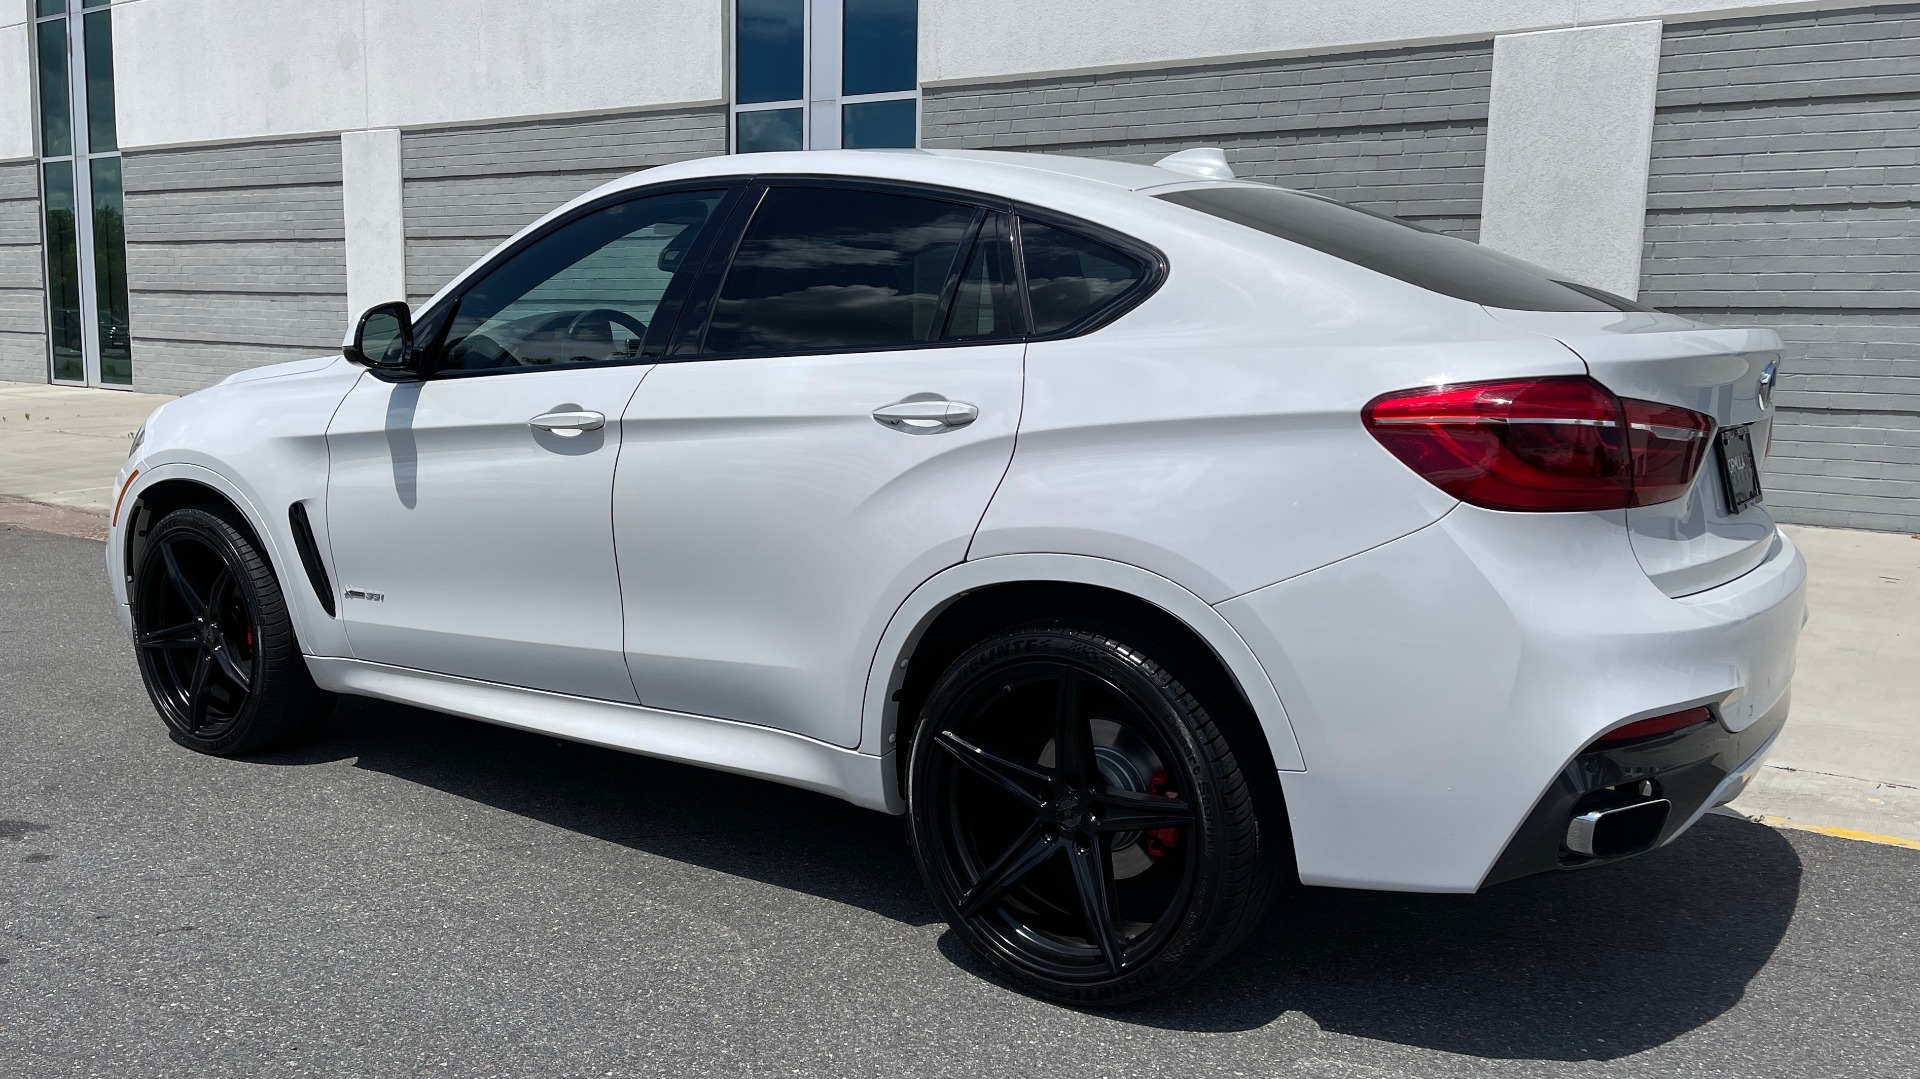 Used 2018 BMW X6 XDRIVE35I M-SPORT / NAV / DRVR ASST PLUS / ADAPT M-SUSP / REARVIEW for sale Sold at Formula Imports in Charlotte NC 28227 7